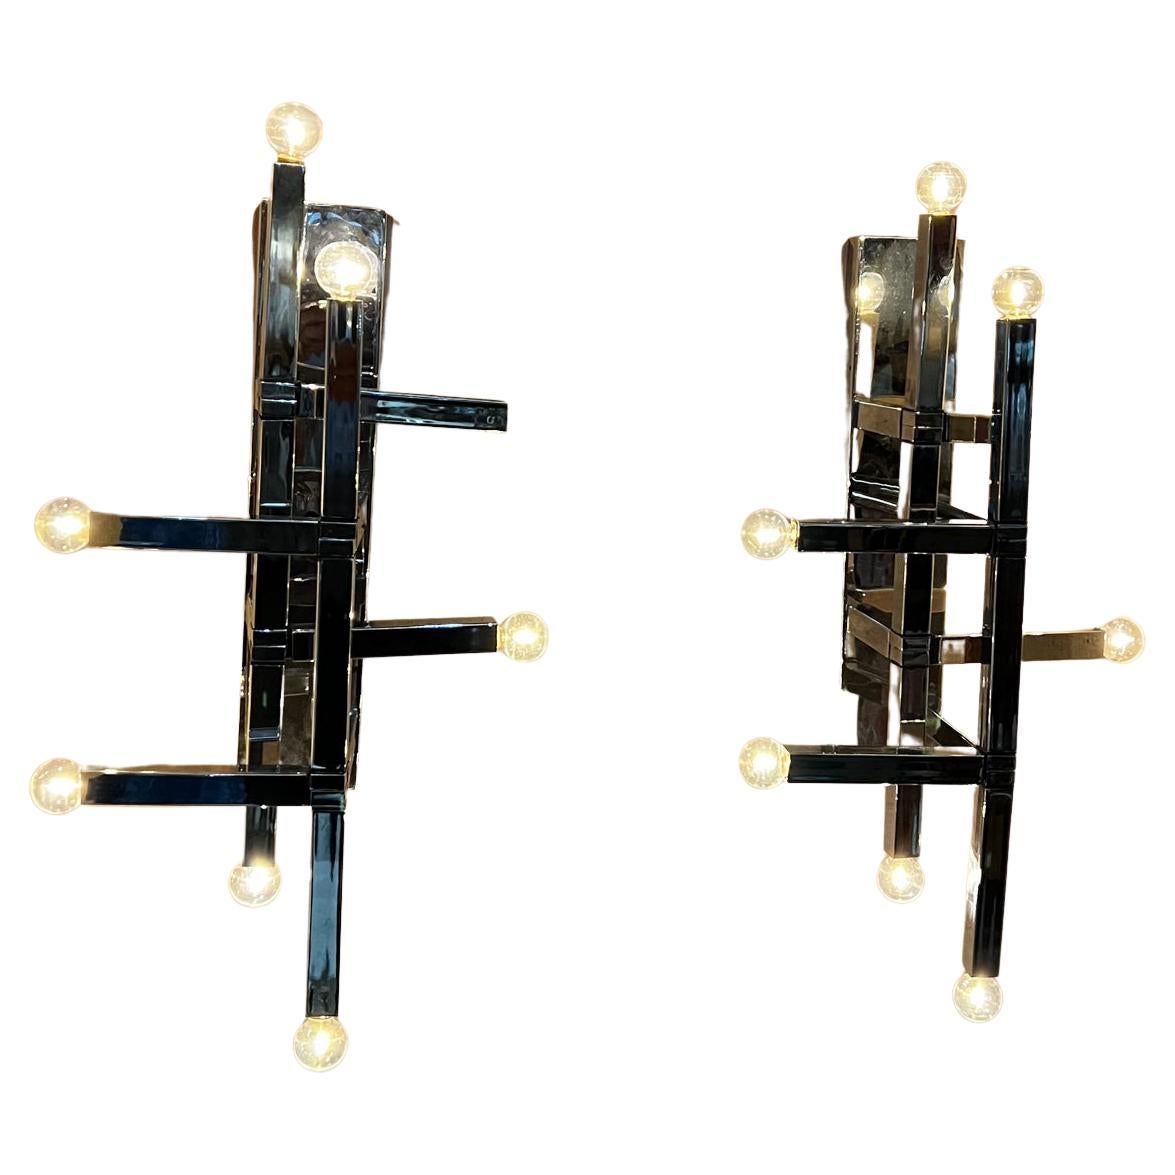 1970s Spectacular Stilnovo style wall sconces from Mexico.
Vintage set made in Mexico after Gaetano Sciolari Futuristic Series.
Stunning geometric overlap.
Each sconce takes 8 candelabra bulbs.
Preowned condition restored; new chrome plating,